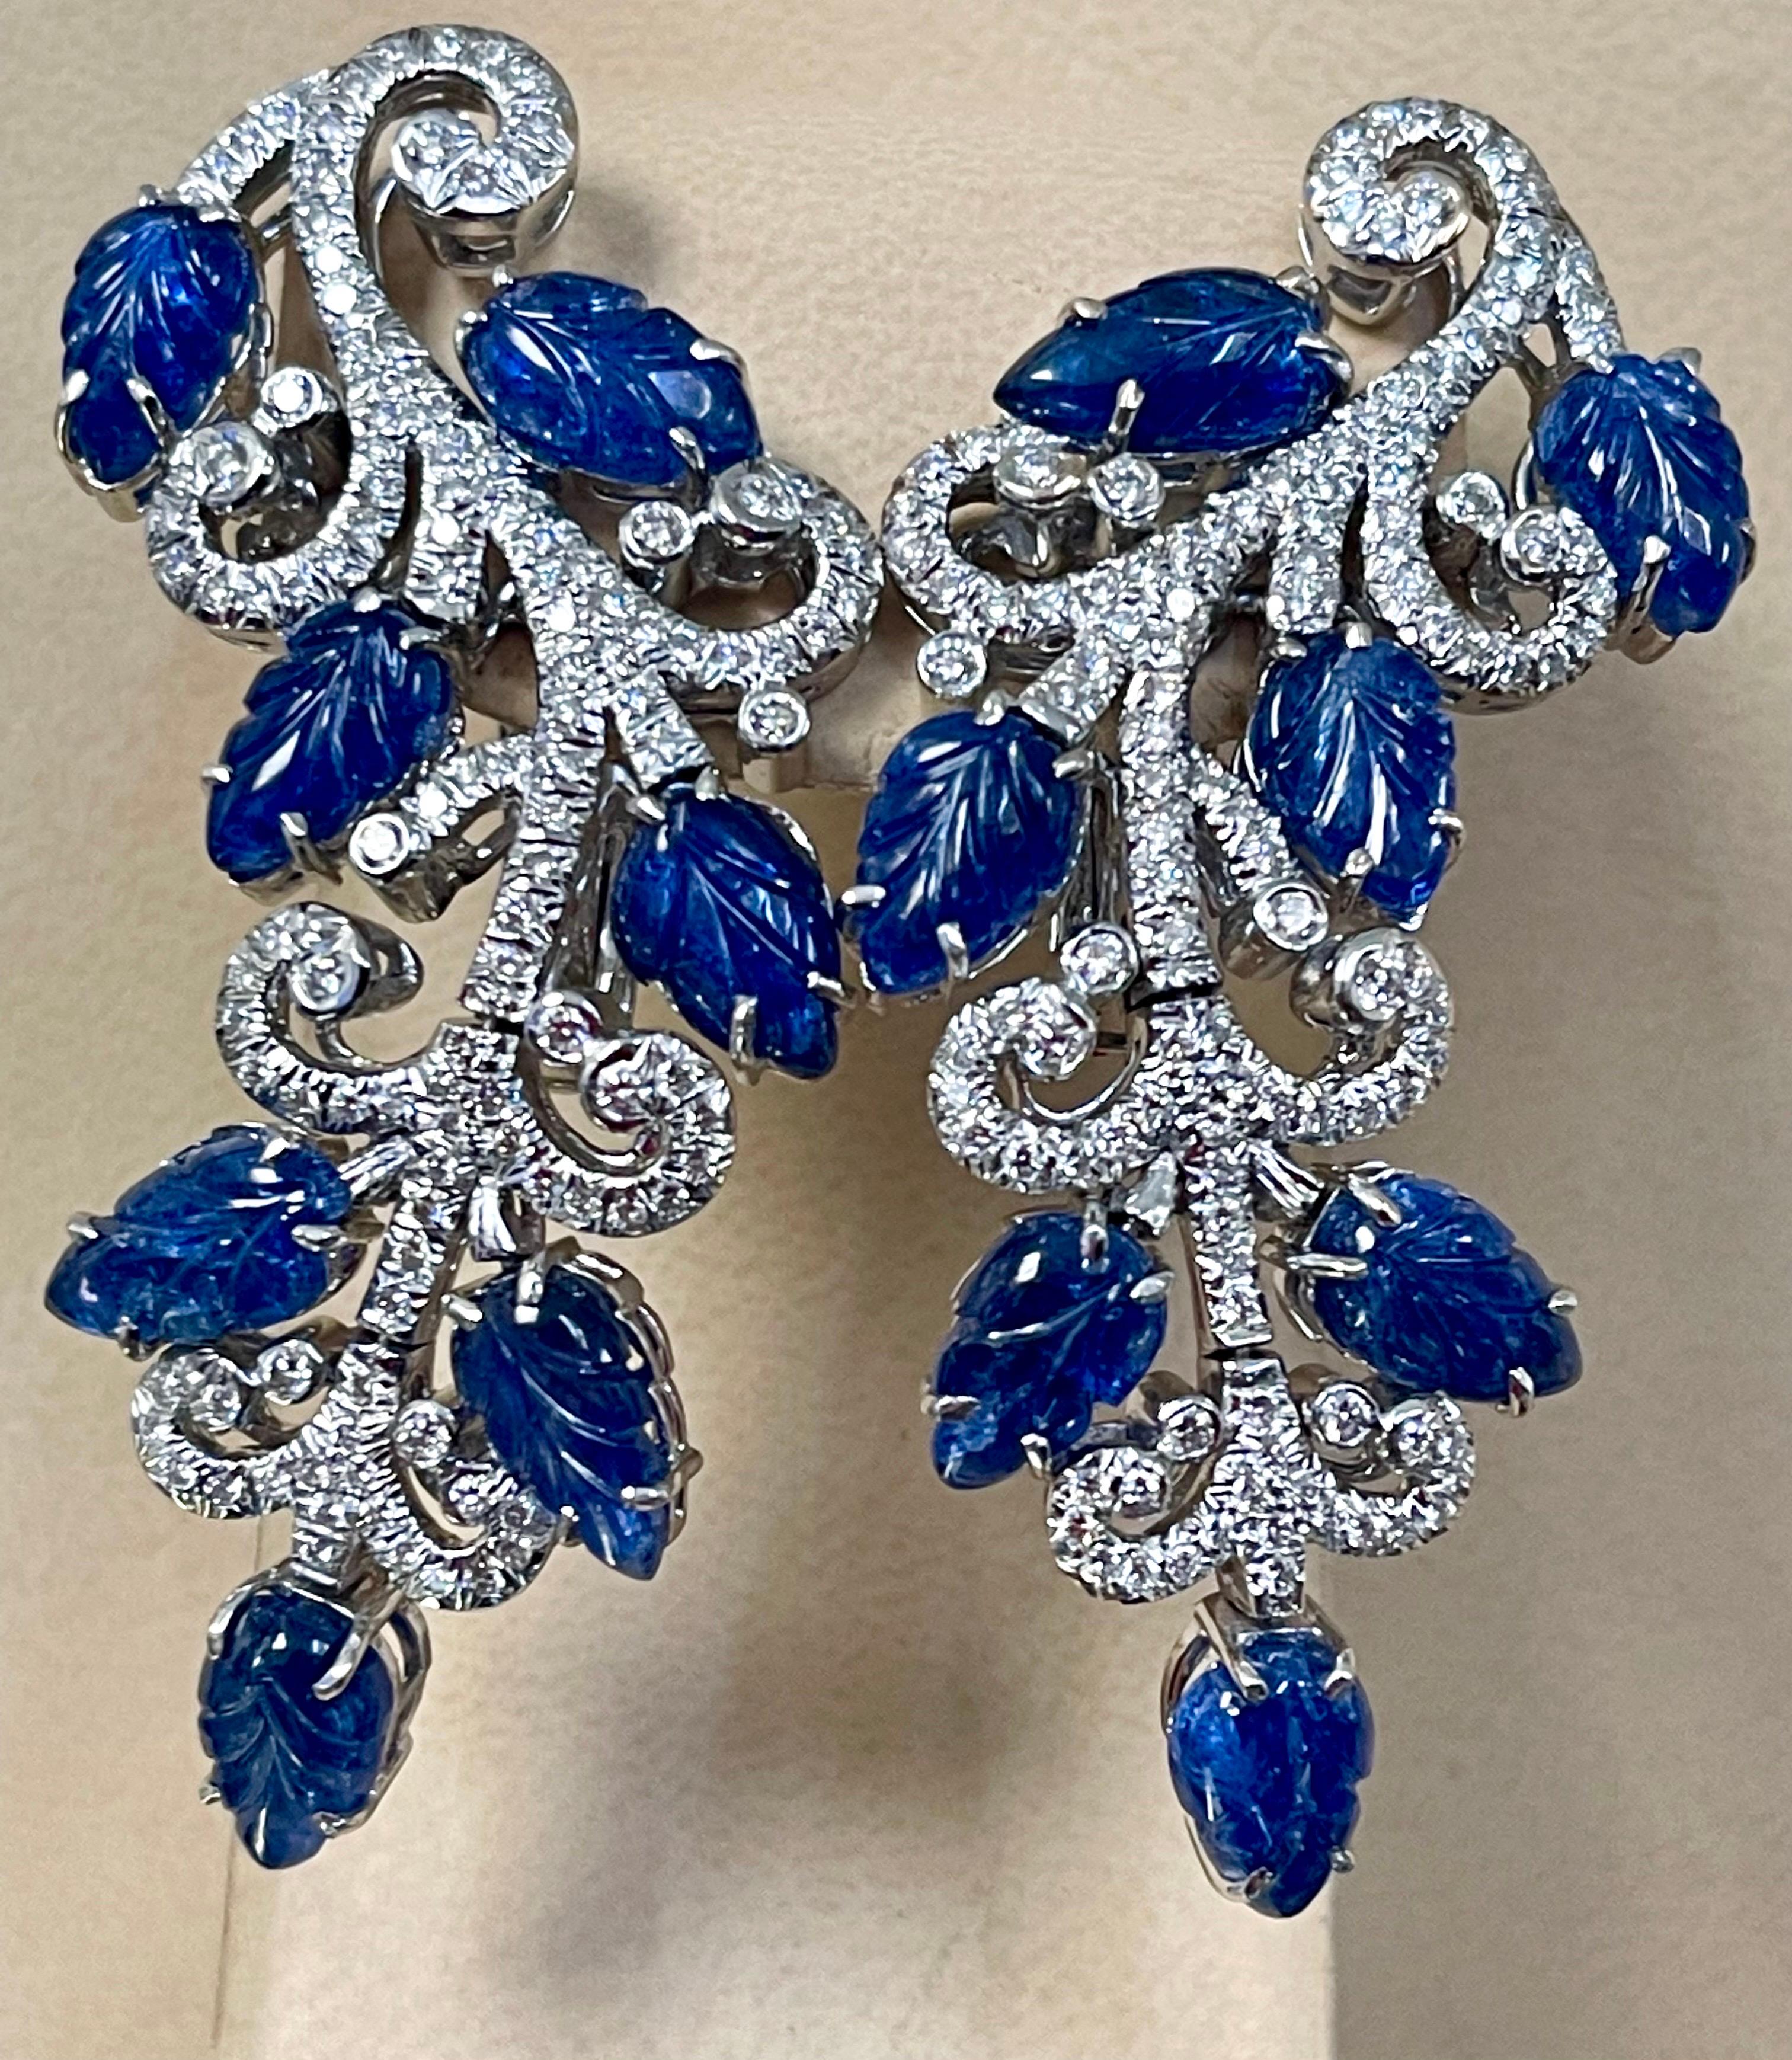 330 Ct Natural Carved Blue Sapphire & 65 Ct Diamond Necklace Bracelet & Earring For Sale 1